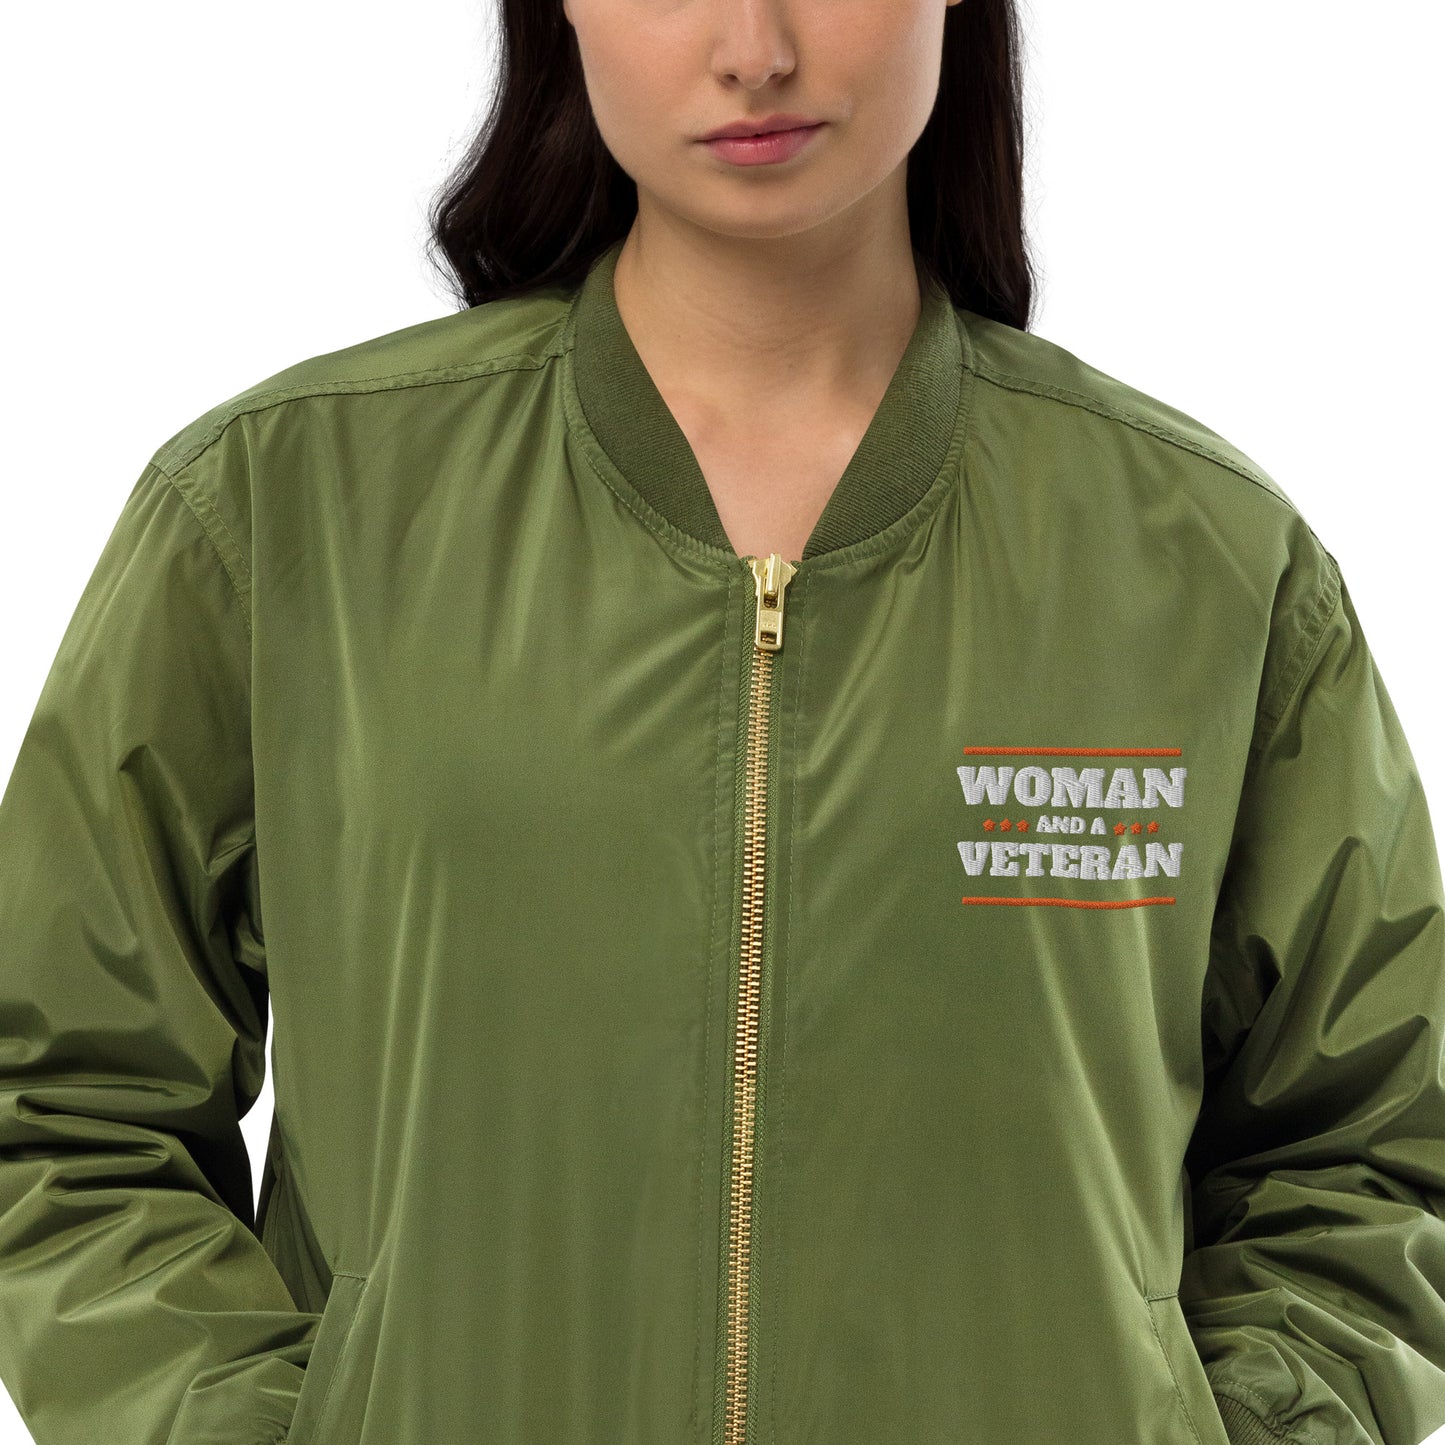 Woman and a Veteran Premium recycled bomber jacket